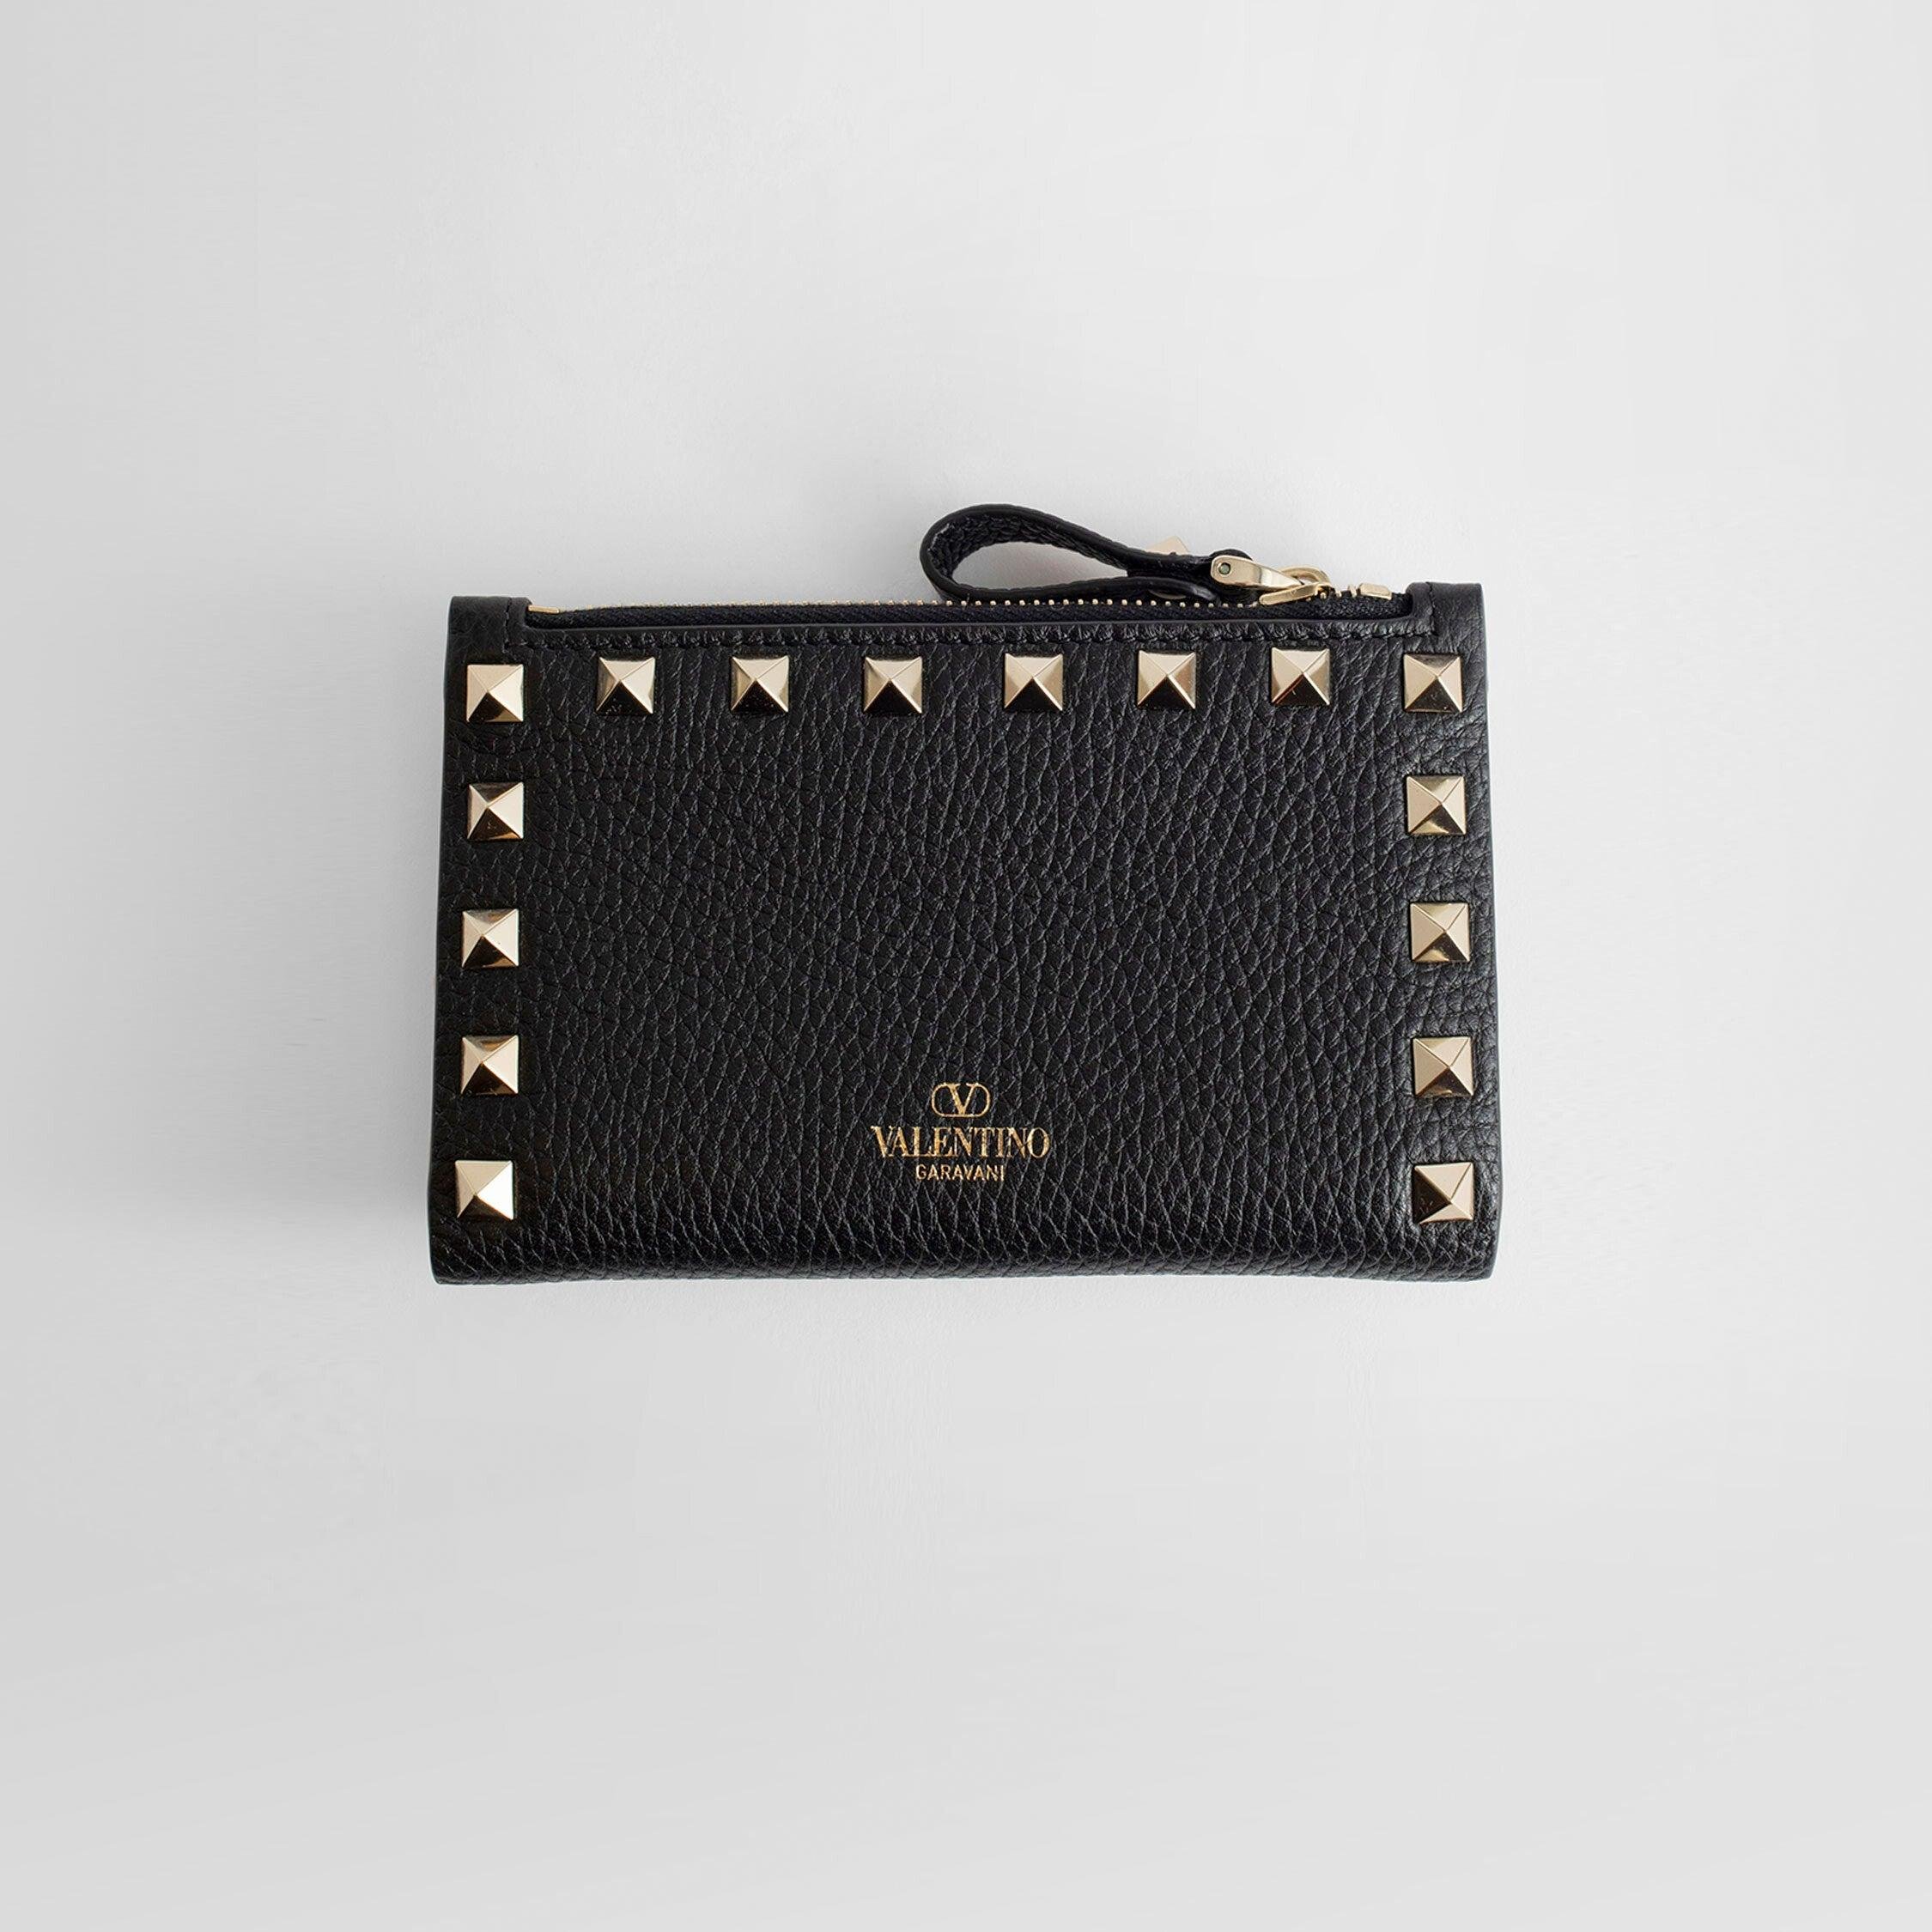 VALENTINO WOMAN BLACK WALLETS & CARDHOLDERS by VALENTINO